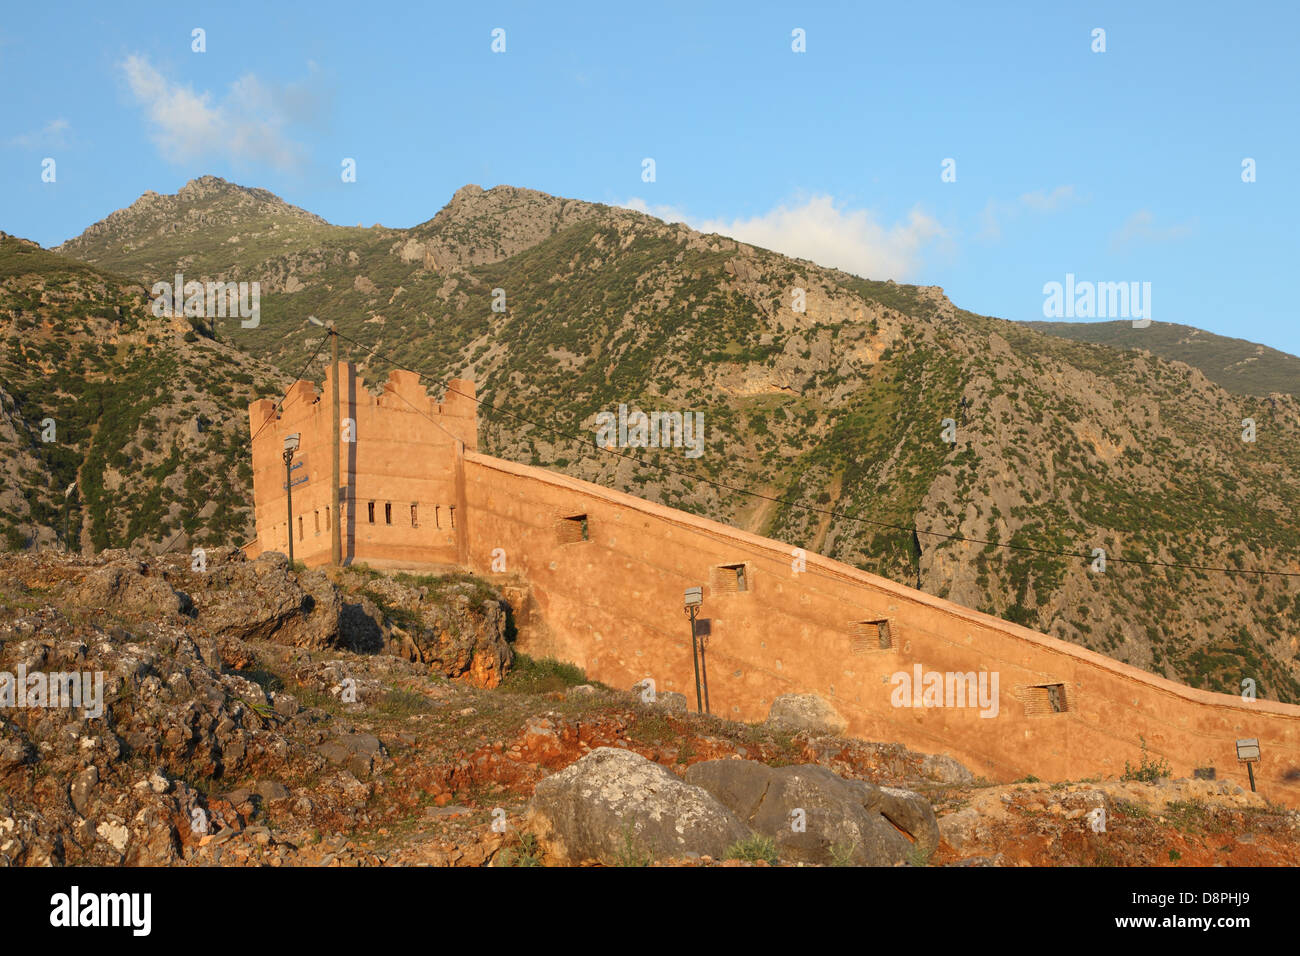 Old city wall of Chefchaouen, Morocco Stock Photo